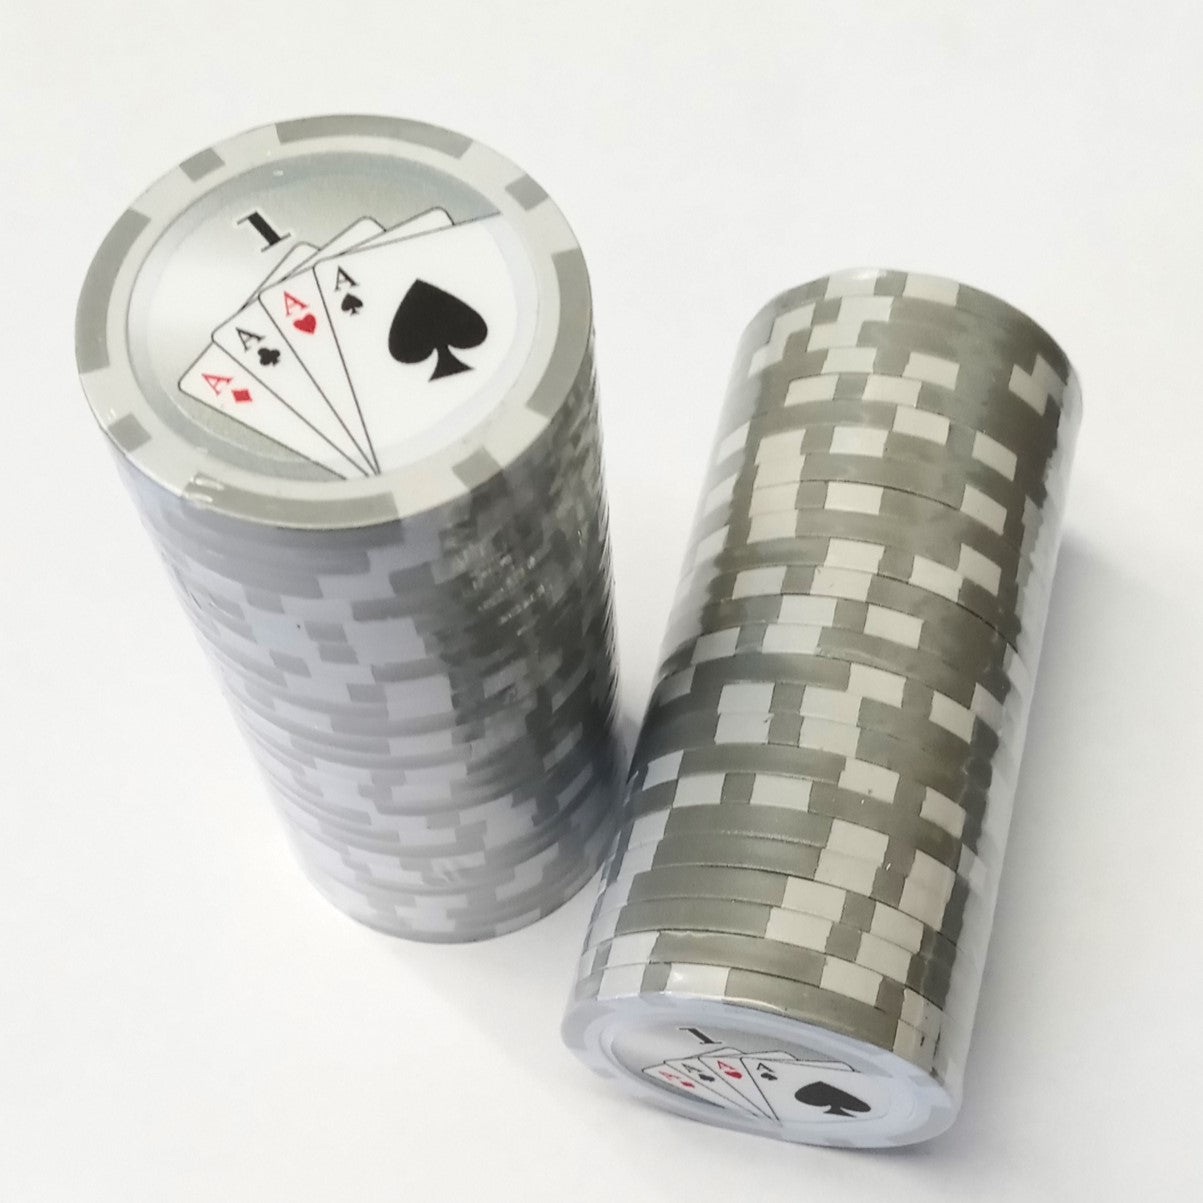 Light Gray $1 Aces, Four of a Kind Hand, Poker Chips 50pcs